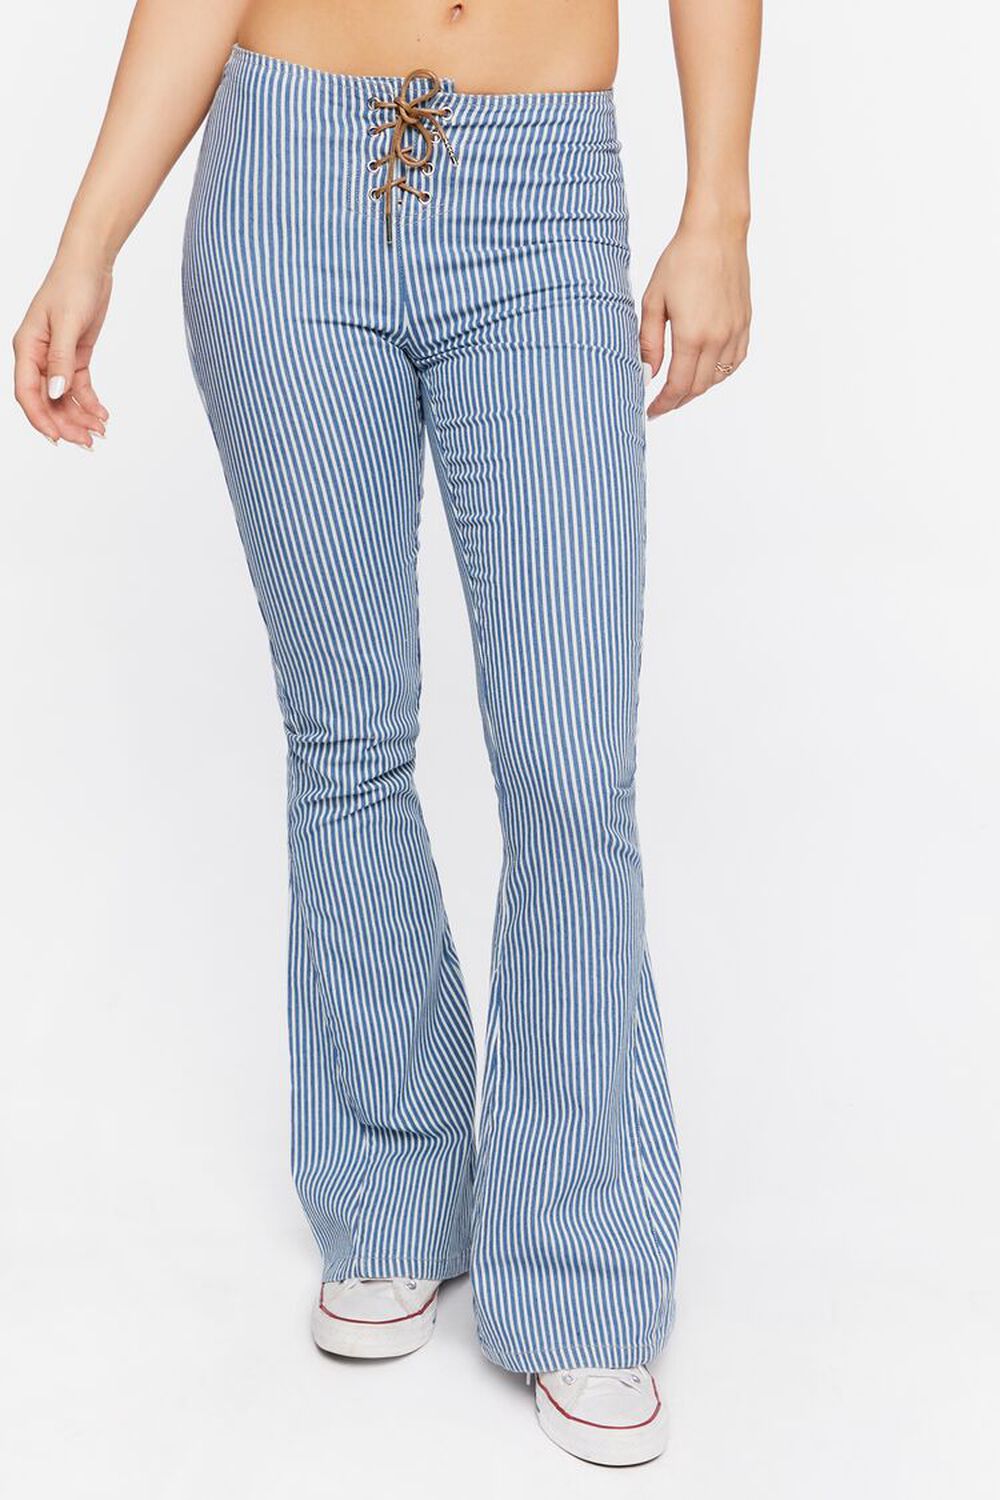 BLUE/WHITE Pinstriped Low-Rise Flare Jeans, image 2